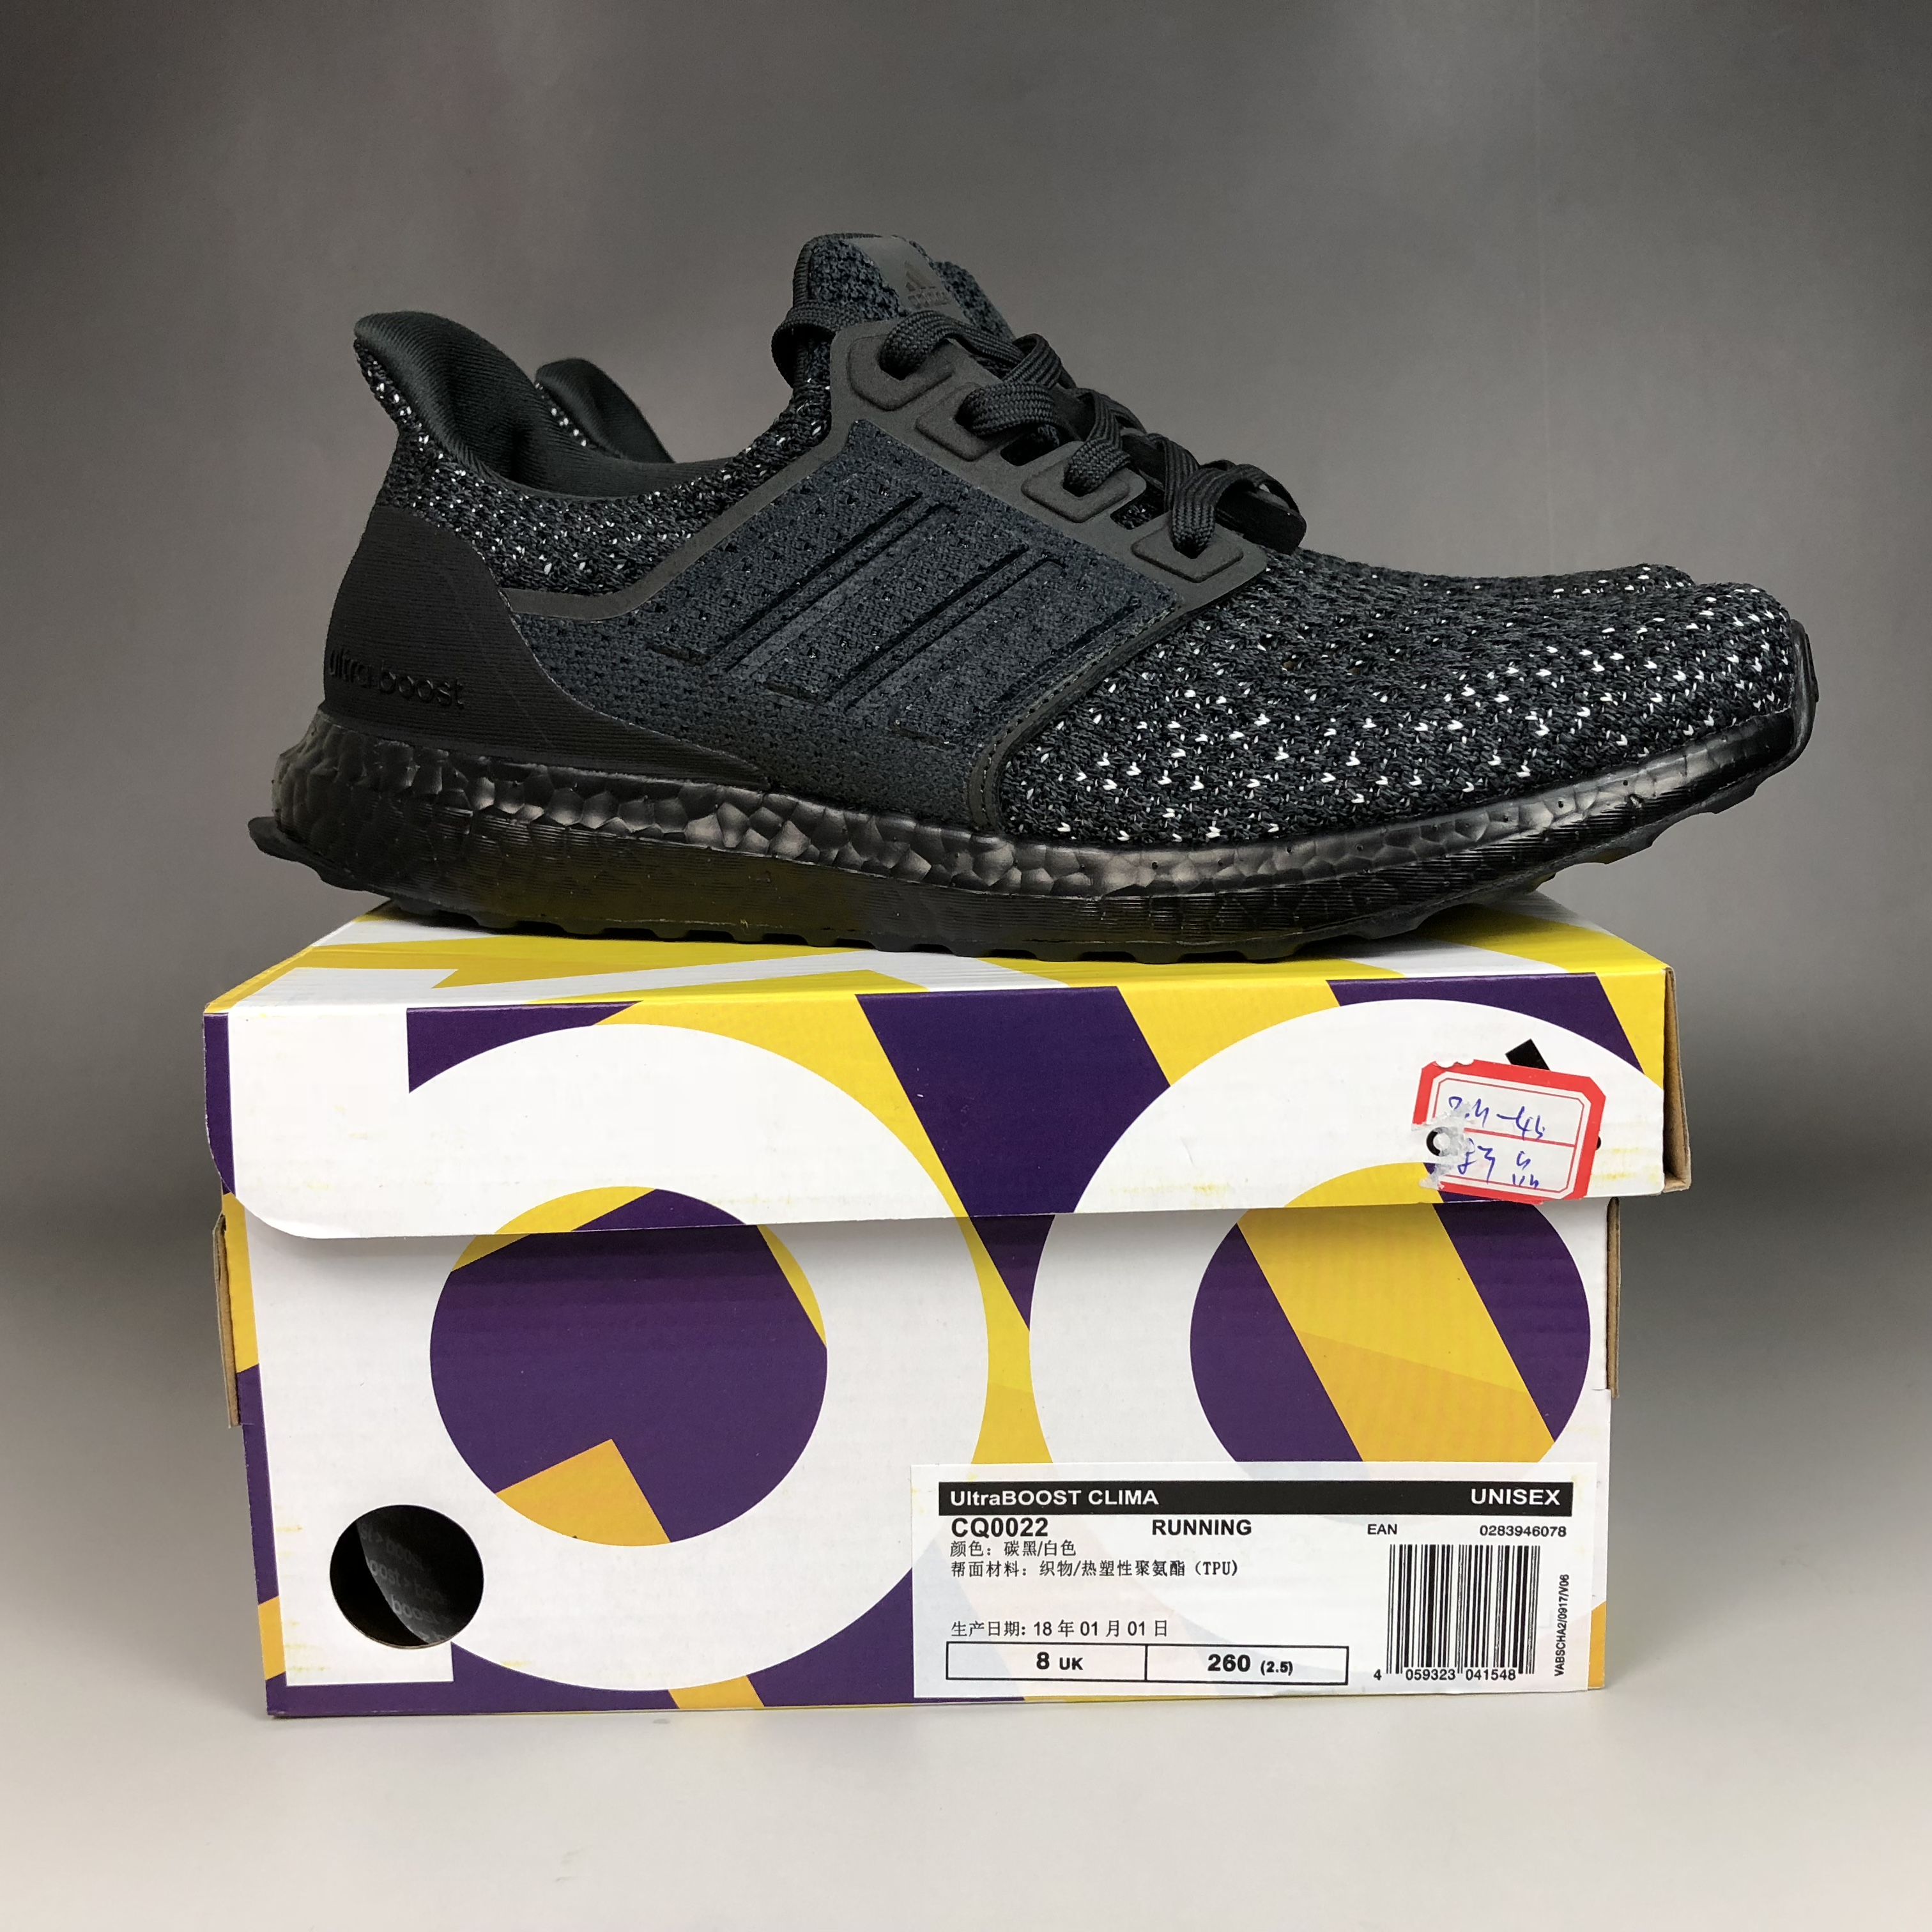 adidas ultra boost clima carbon/orchid tint (carbon)